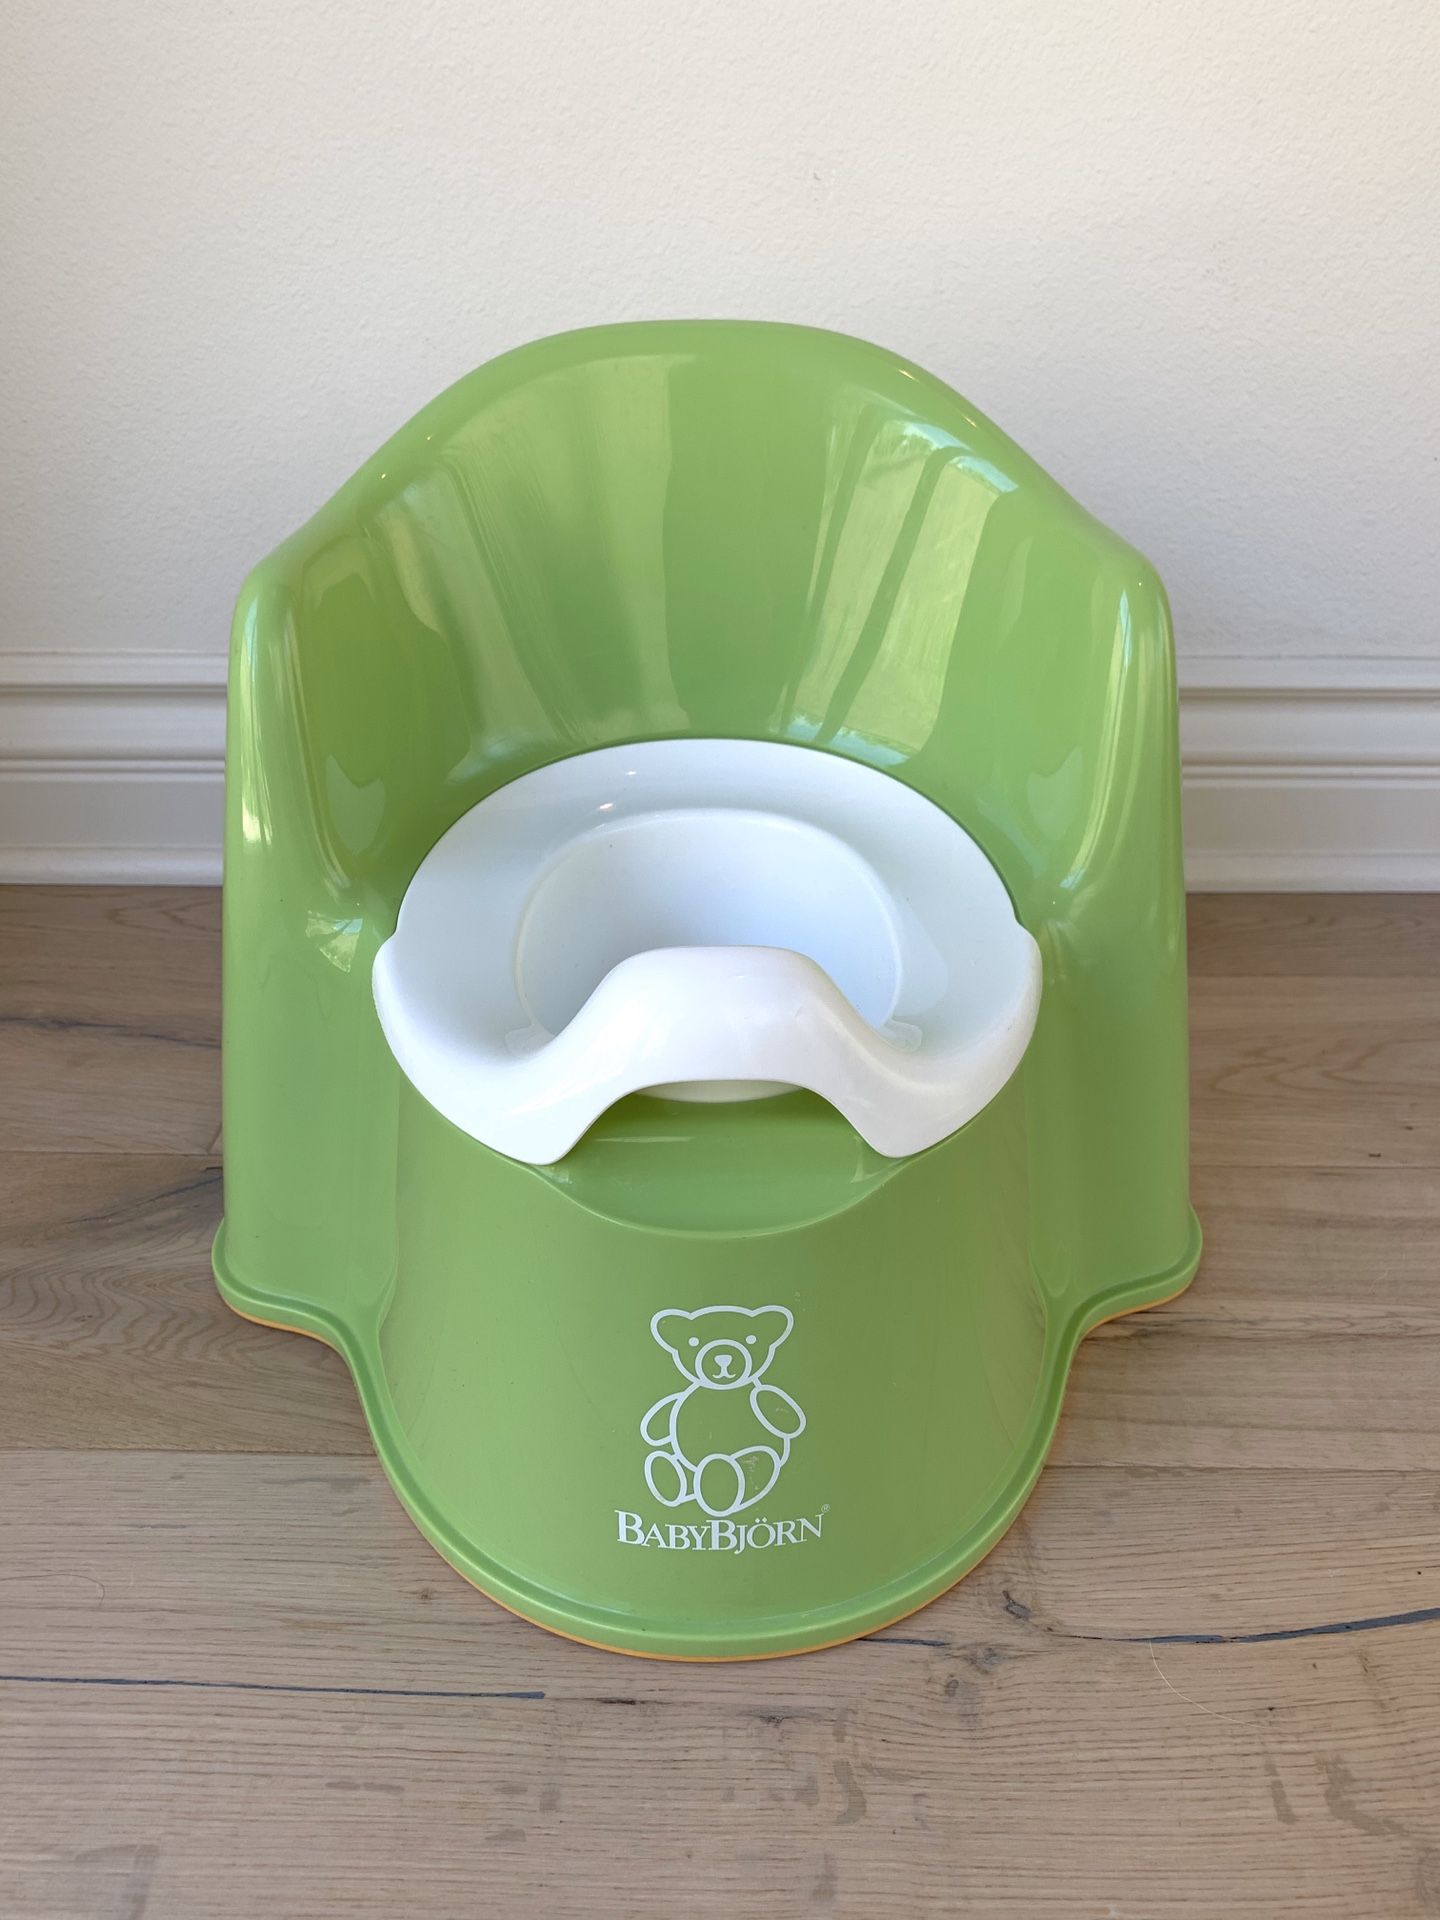 BABYBJORN Potty Chair (Green) for potty training